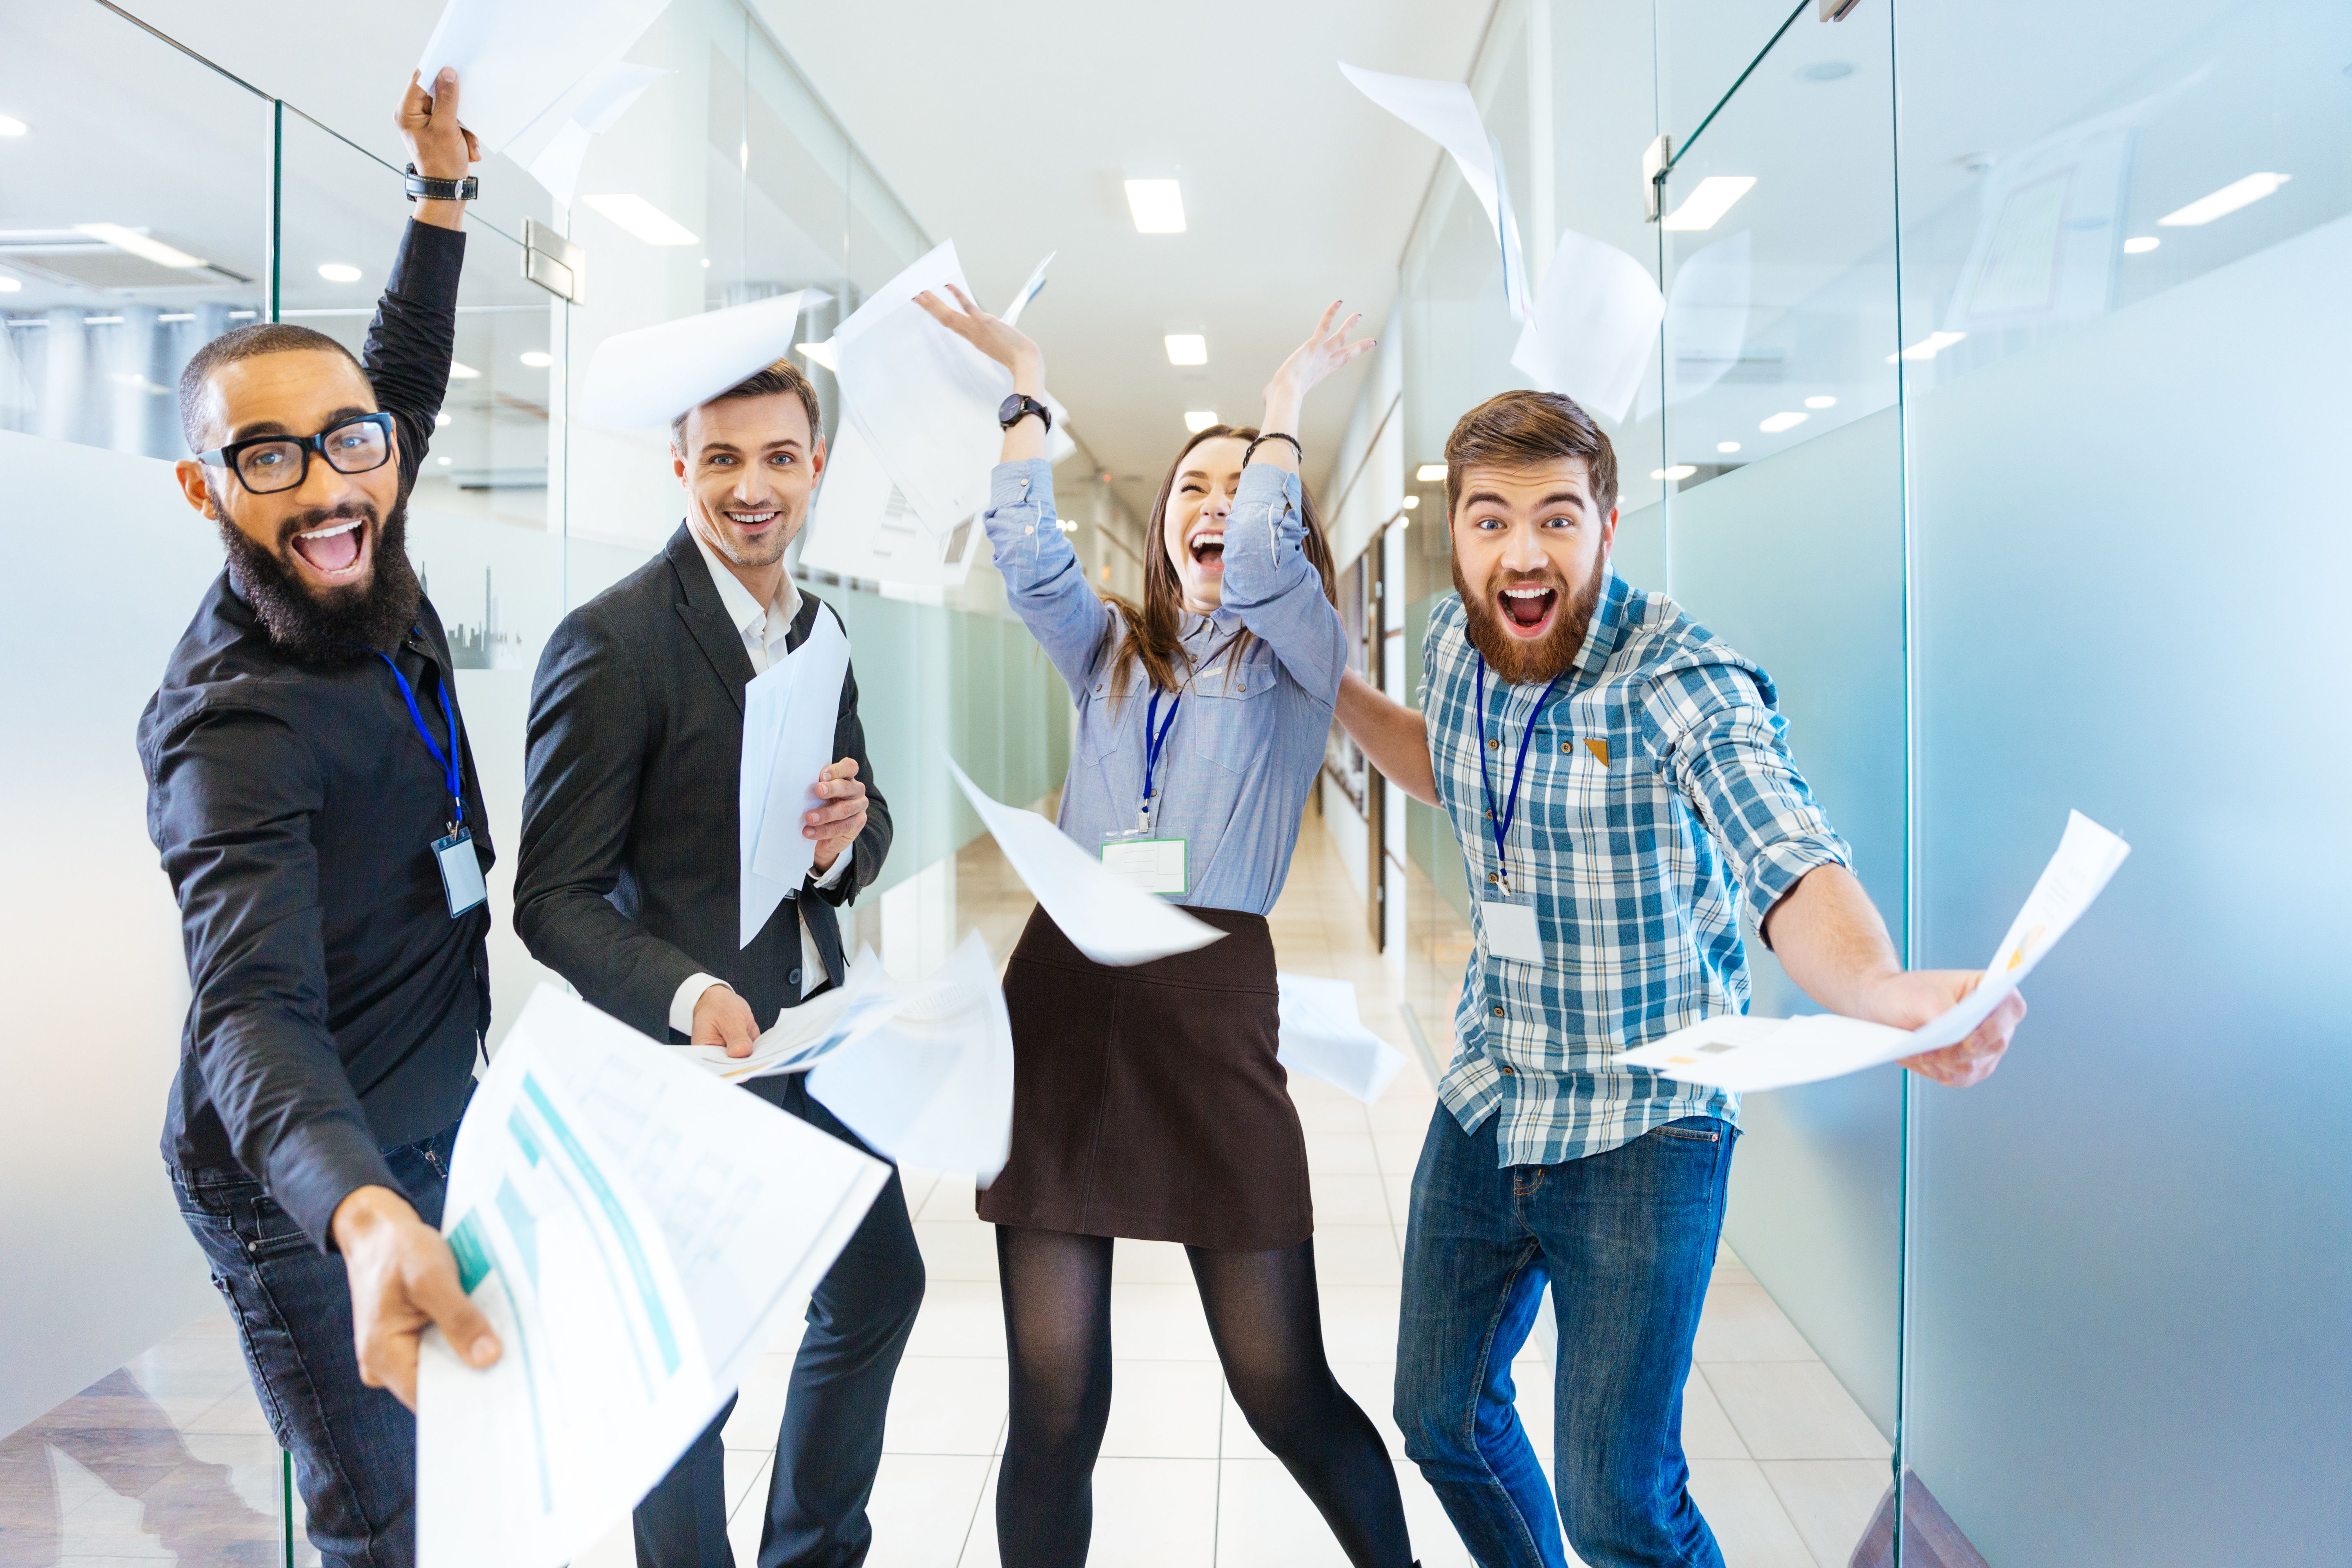 Group of joyful excited business people throwing papers and having fun